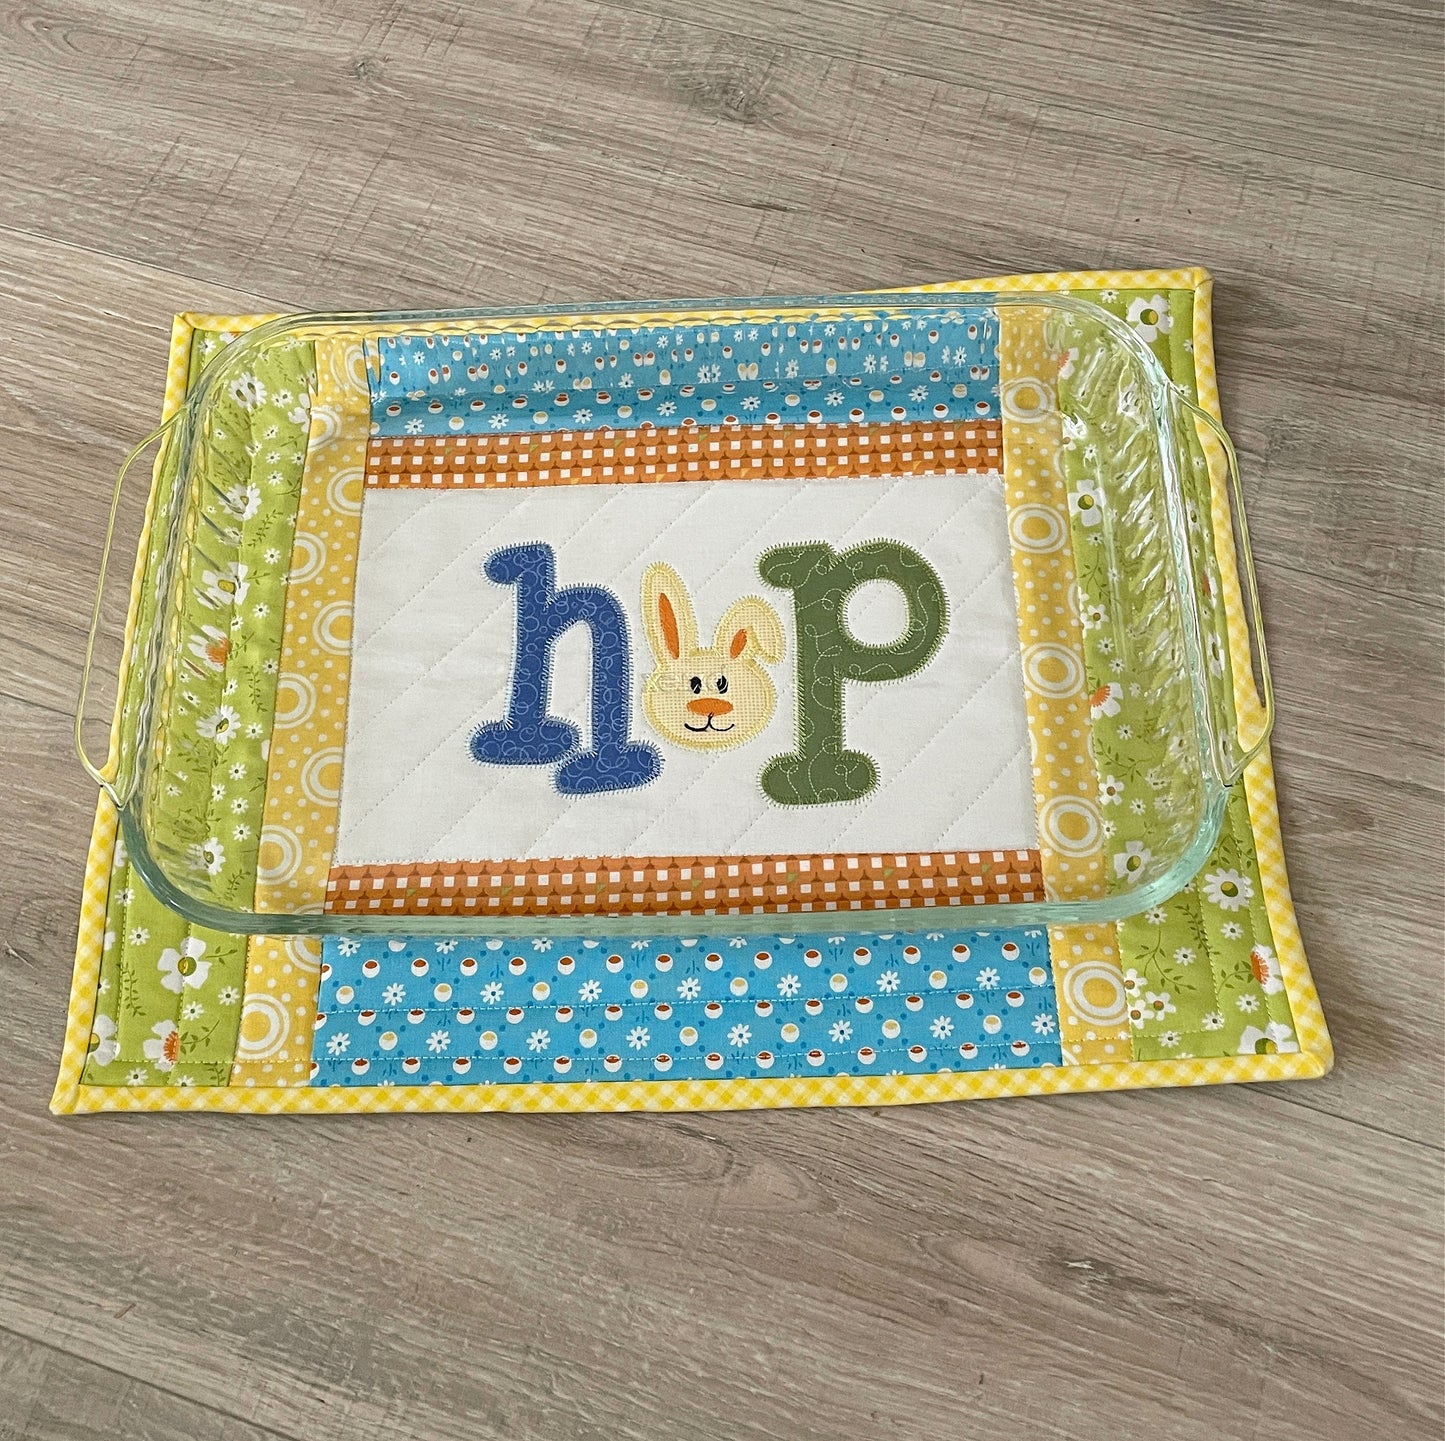 quilted casserole hot pad, yellow and blue with bunny embroidery in center panel spelling HOP